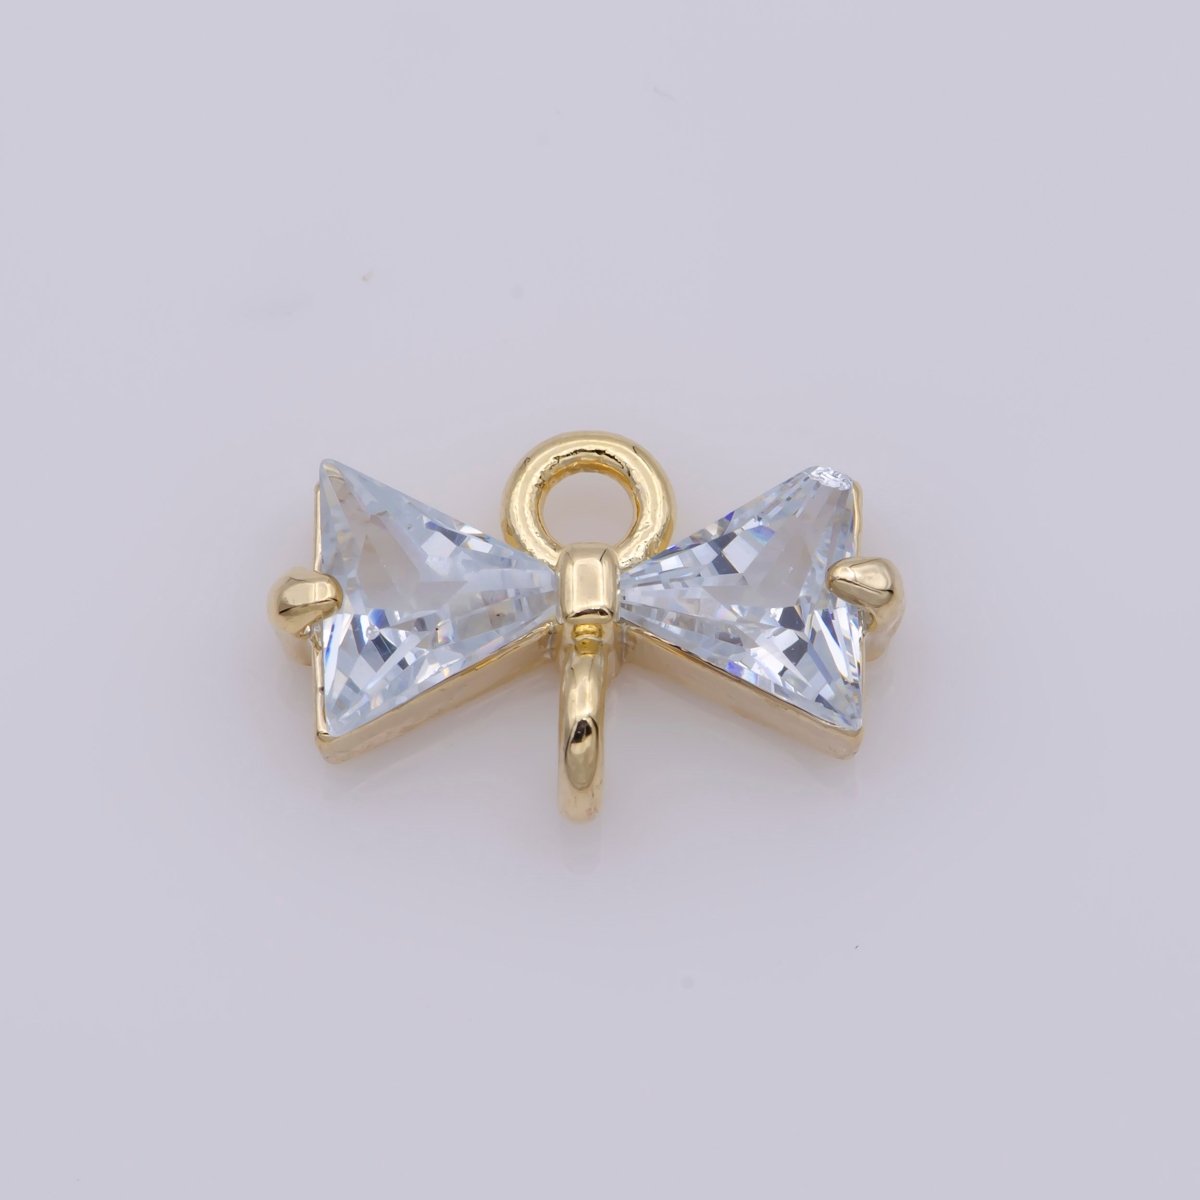 1x Cubic Bow Zirconia 14k Gold Filled Charm Connector, Bow Pendant, Cz Bow Charms with Open Link for Necklace Earring Component - DLUXCA